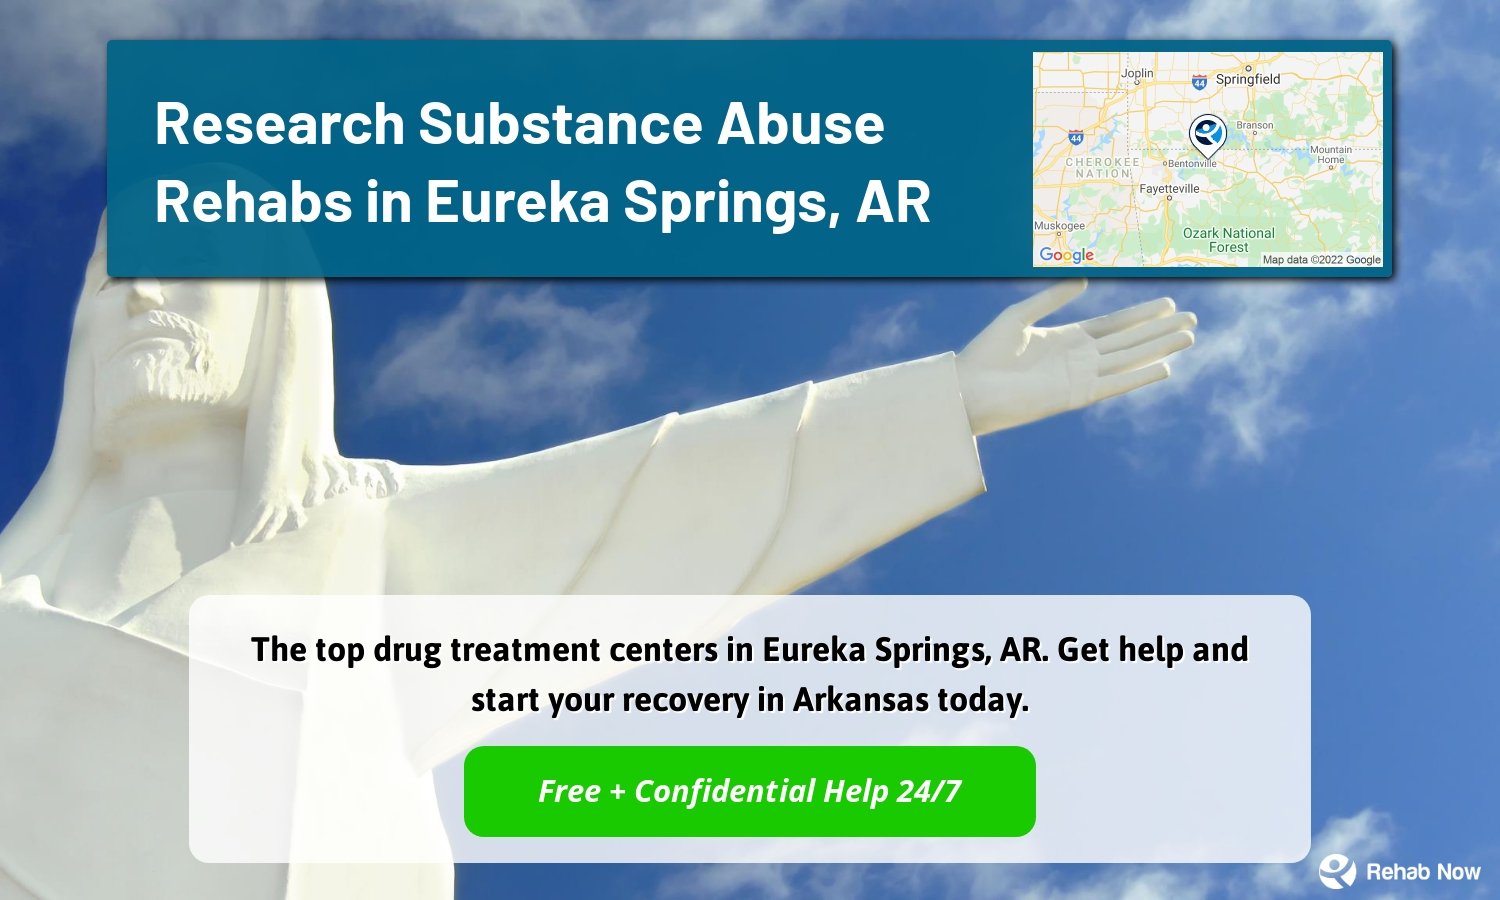 The top drug treatment centers in Eureka Springs, AR. Get help and start your recovery in Arkansas today.